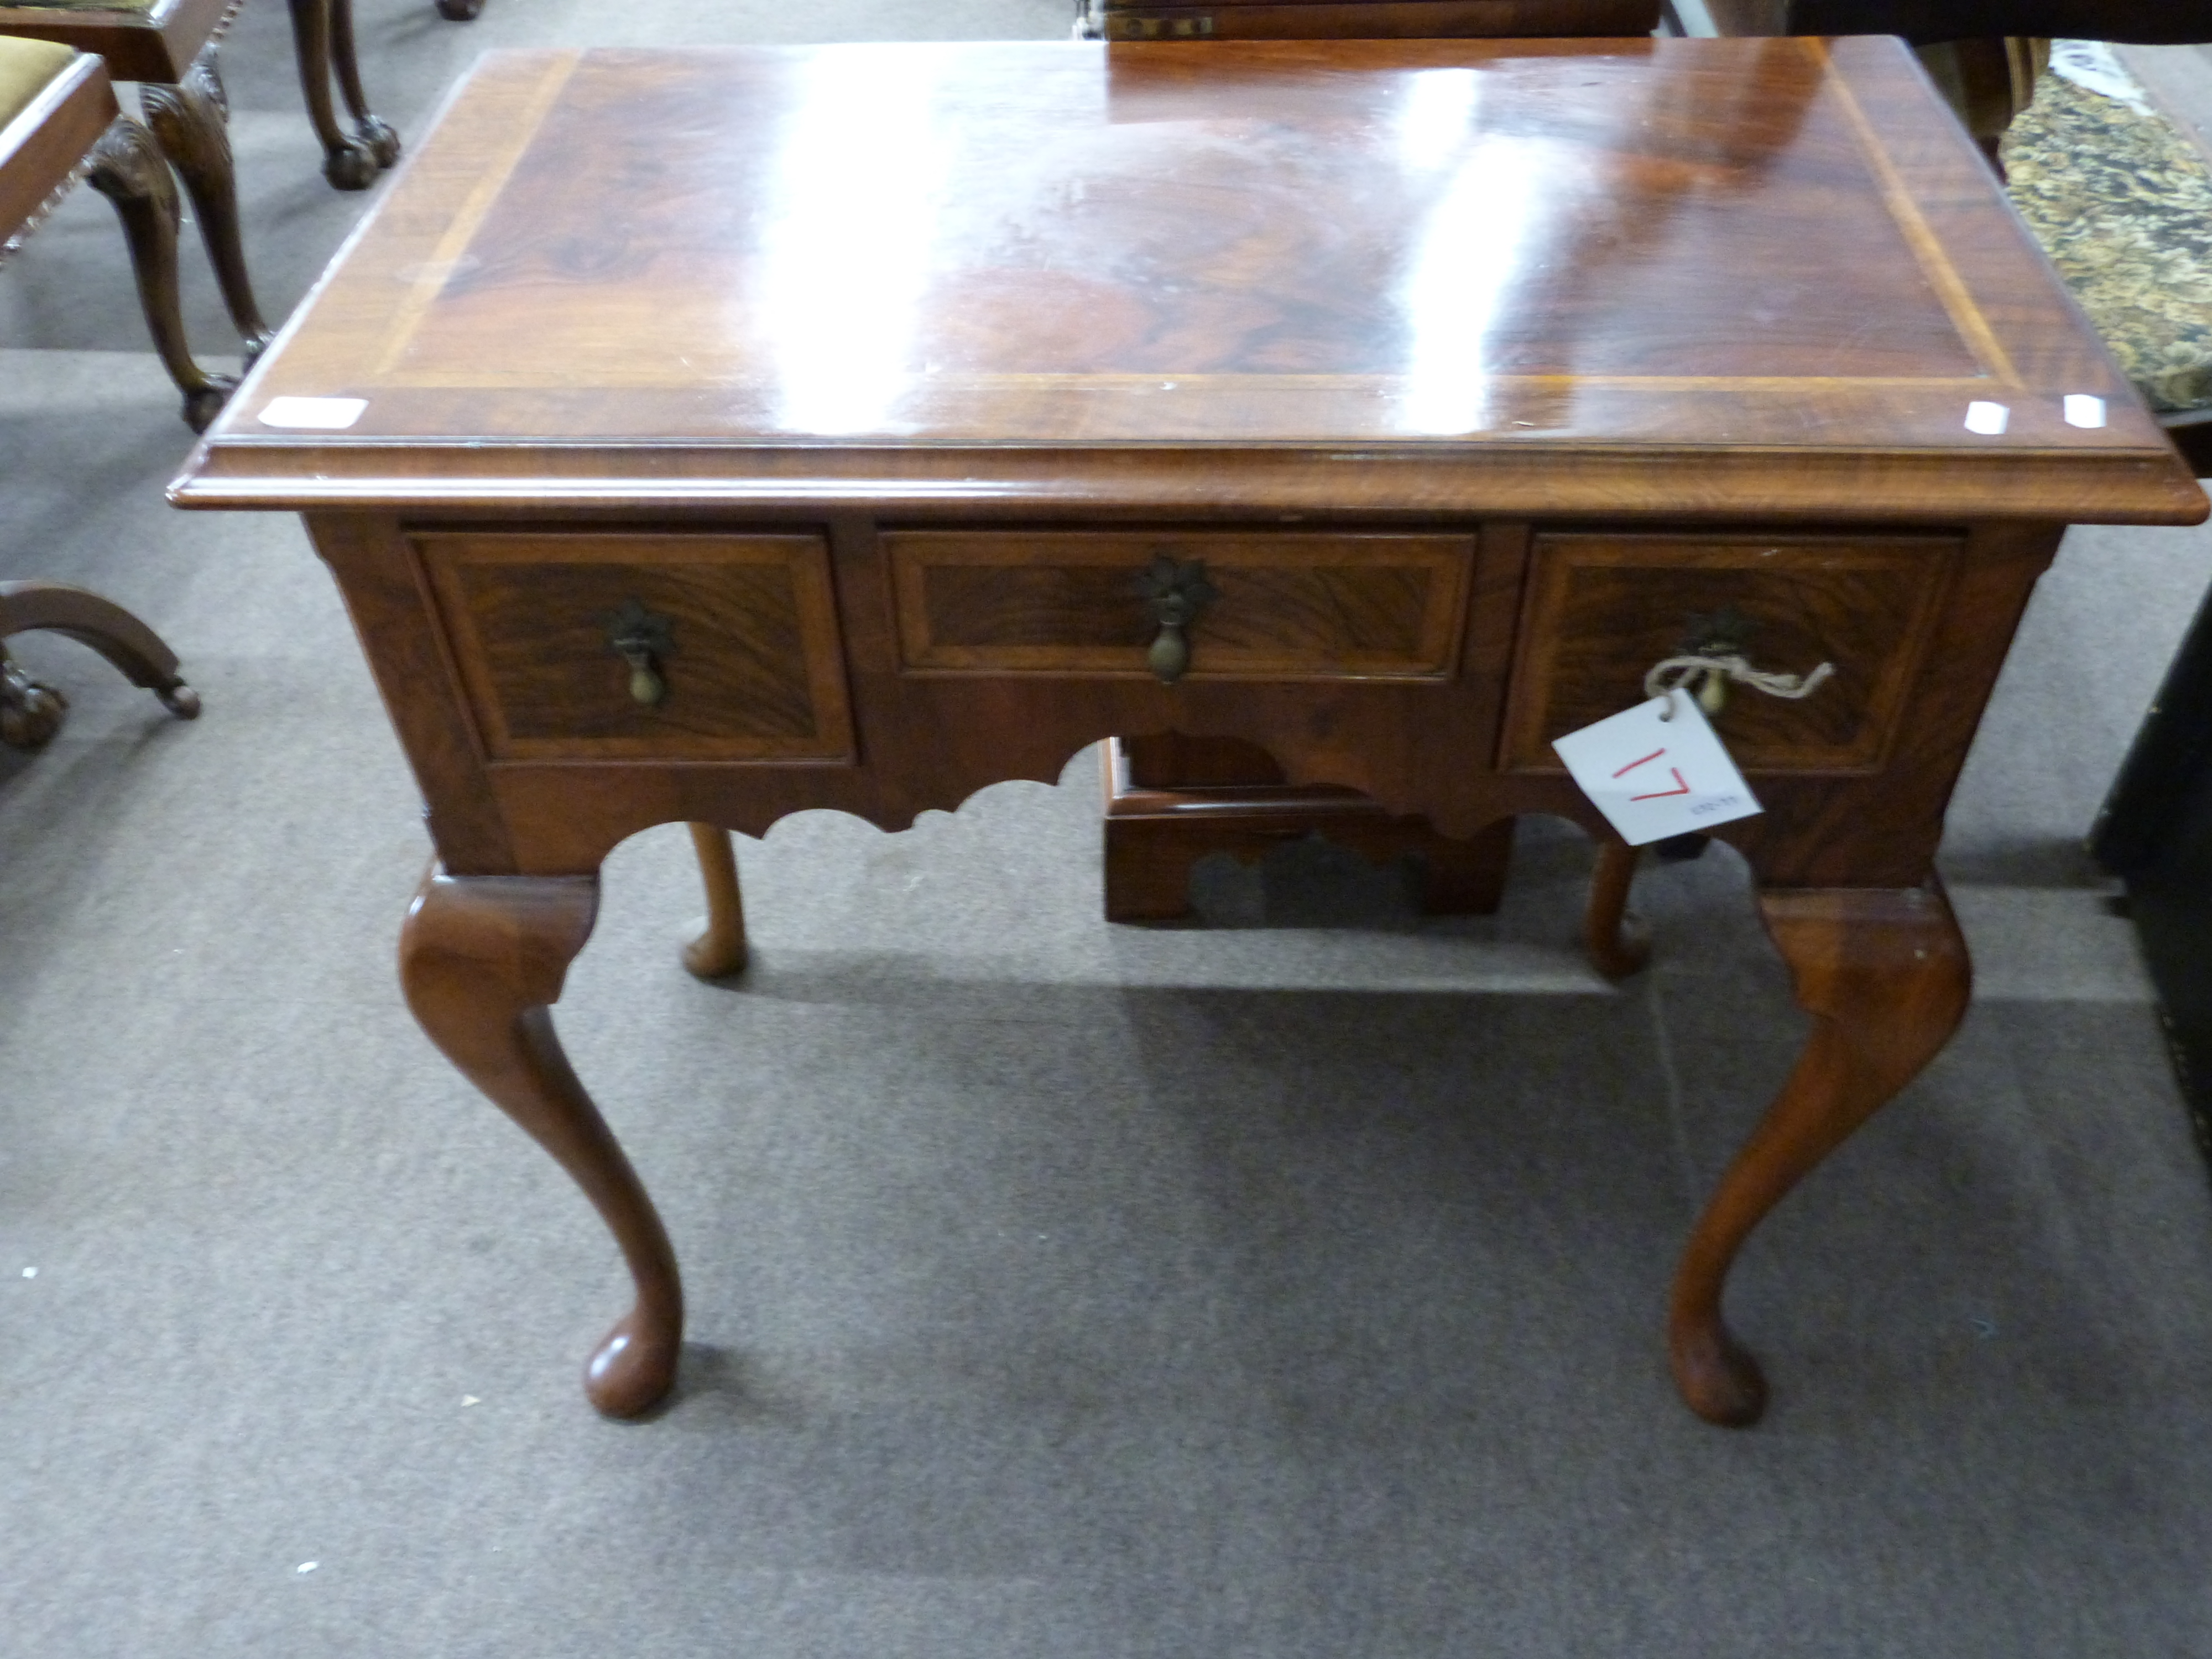 Good quality reproduction walnut veneered lowboy in the Queen Anne style, the body with three